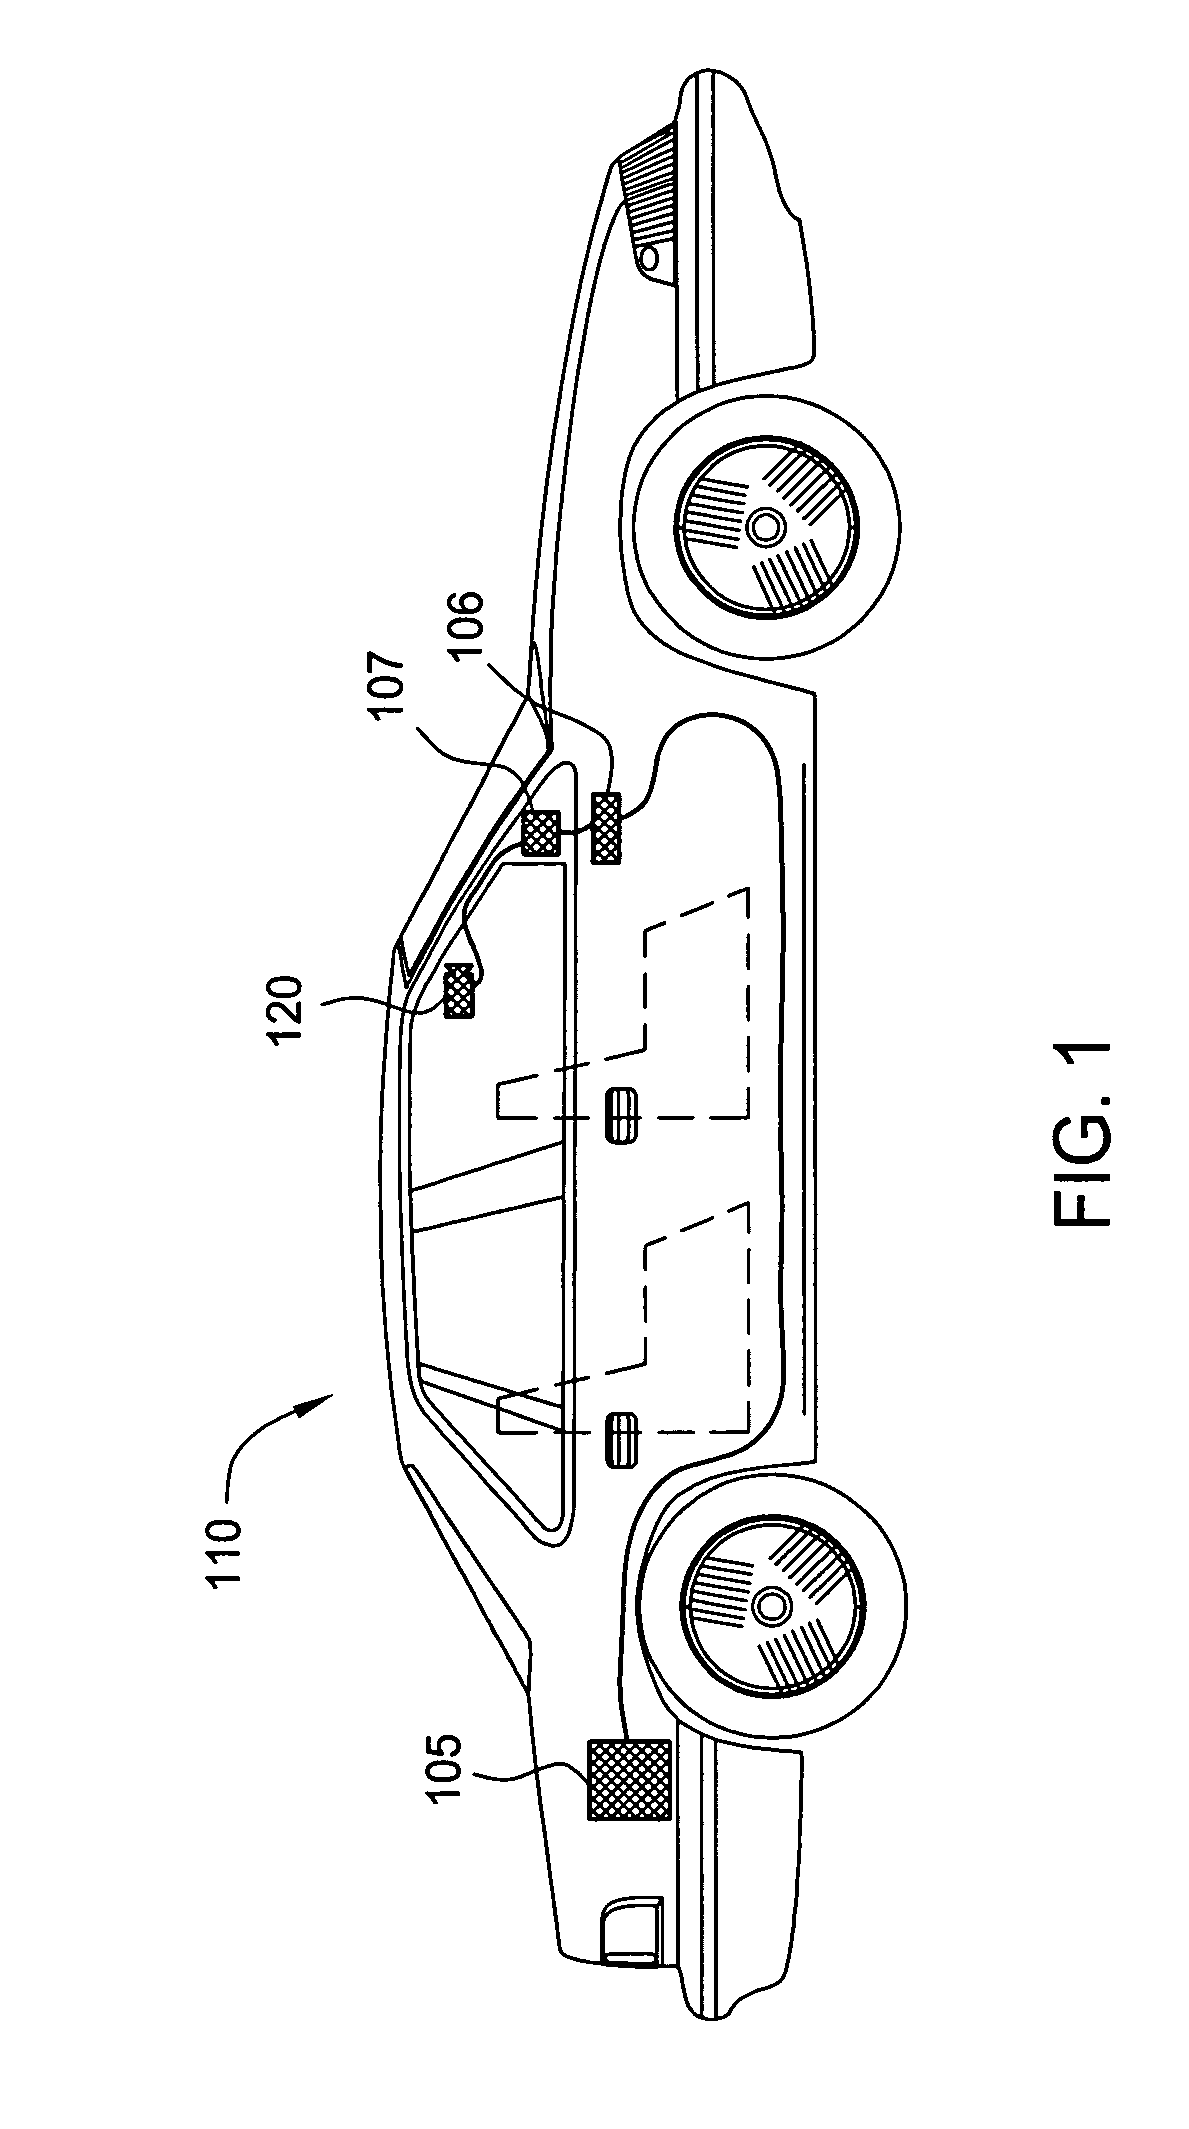 Method for digital video/audio recording with backlight compensation using a touch screen control panel